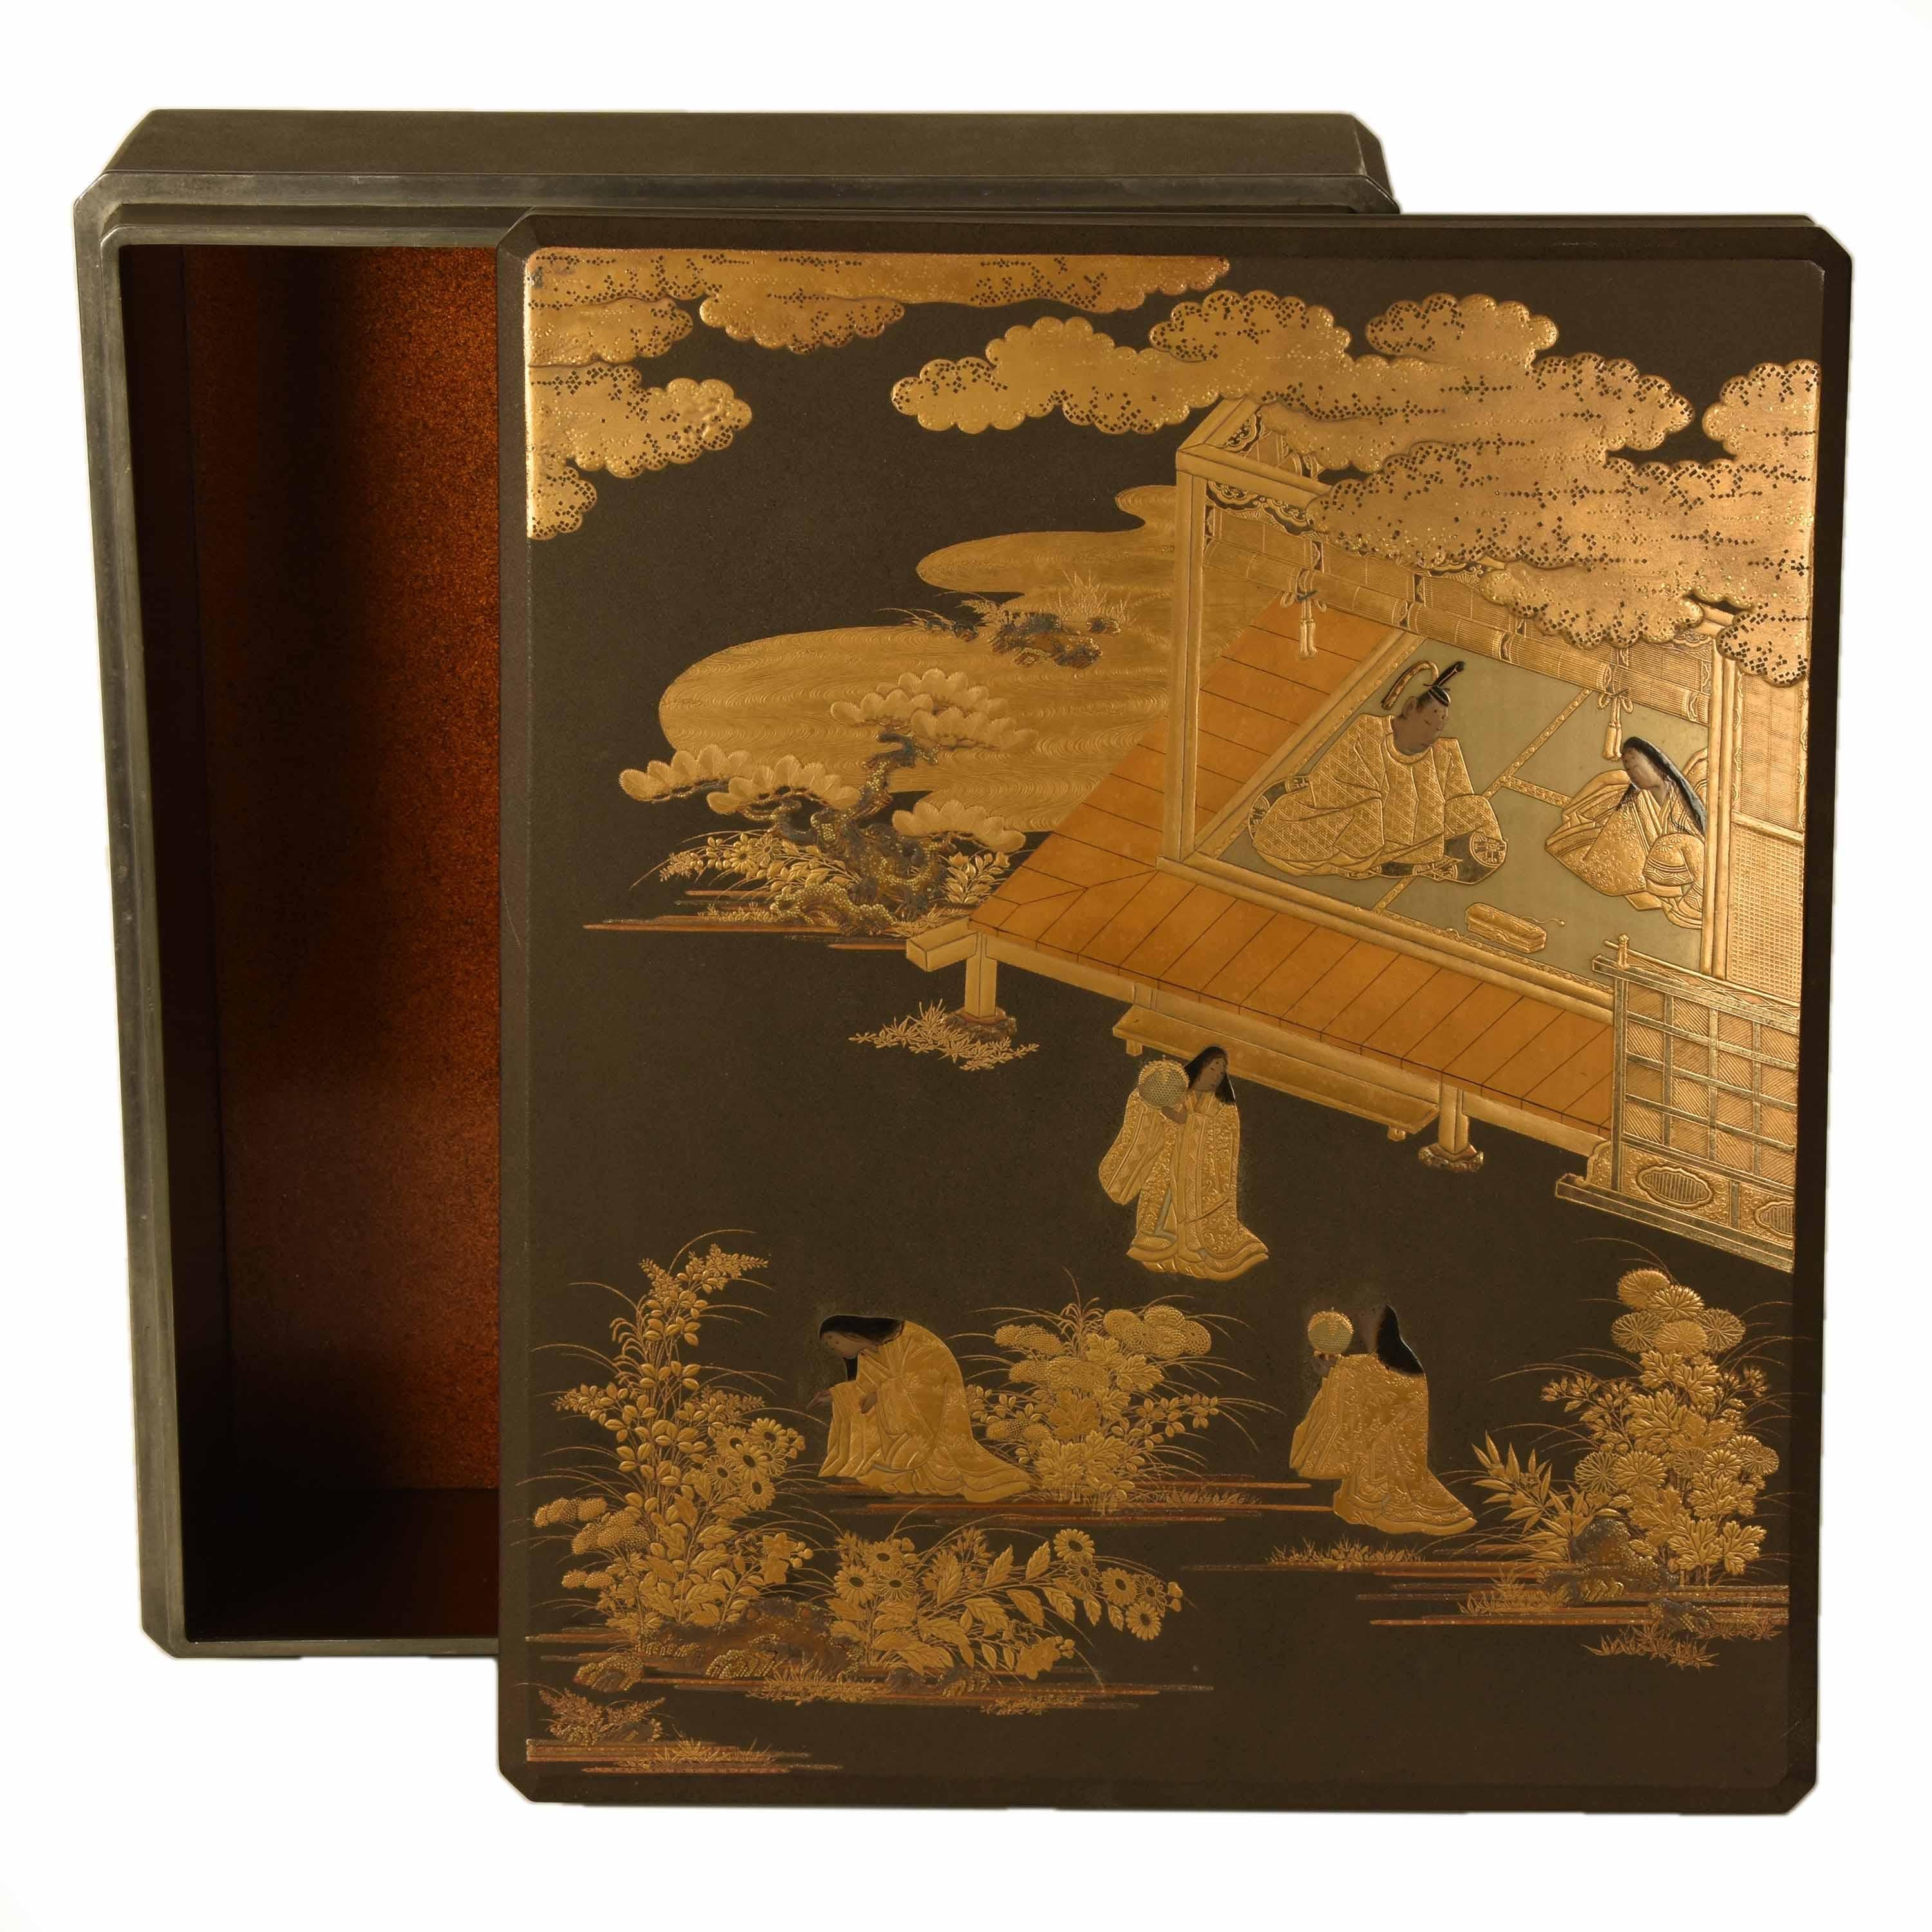 An antique black lacquer document box with an exquisitely detailed, finely wrought design from The Tale of the Genji depicted in gold maki e across the lid. Internally, the box is decorated with high quality nashi ji style lacquer finish. The